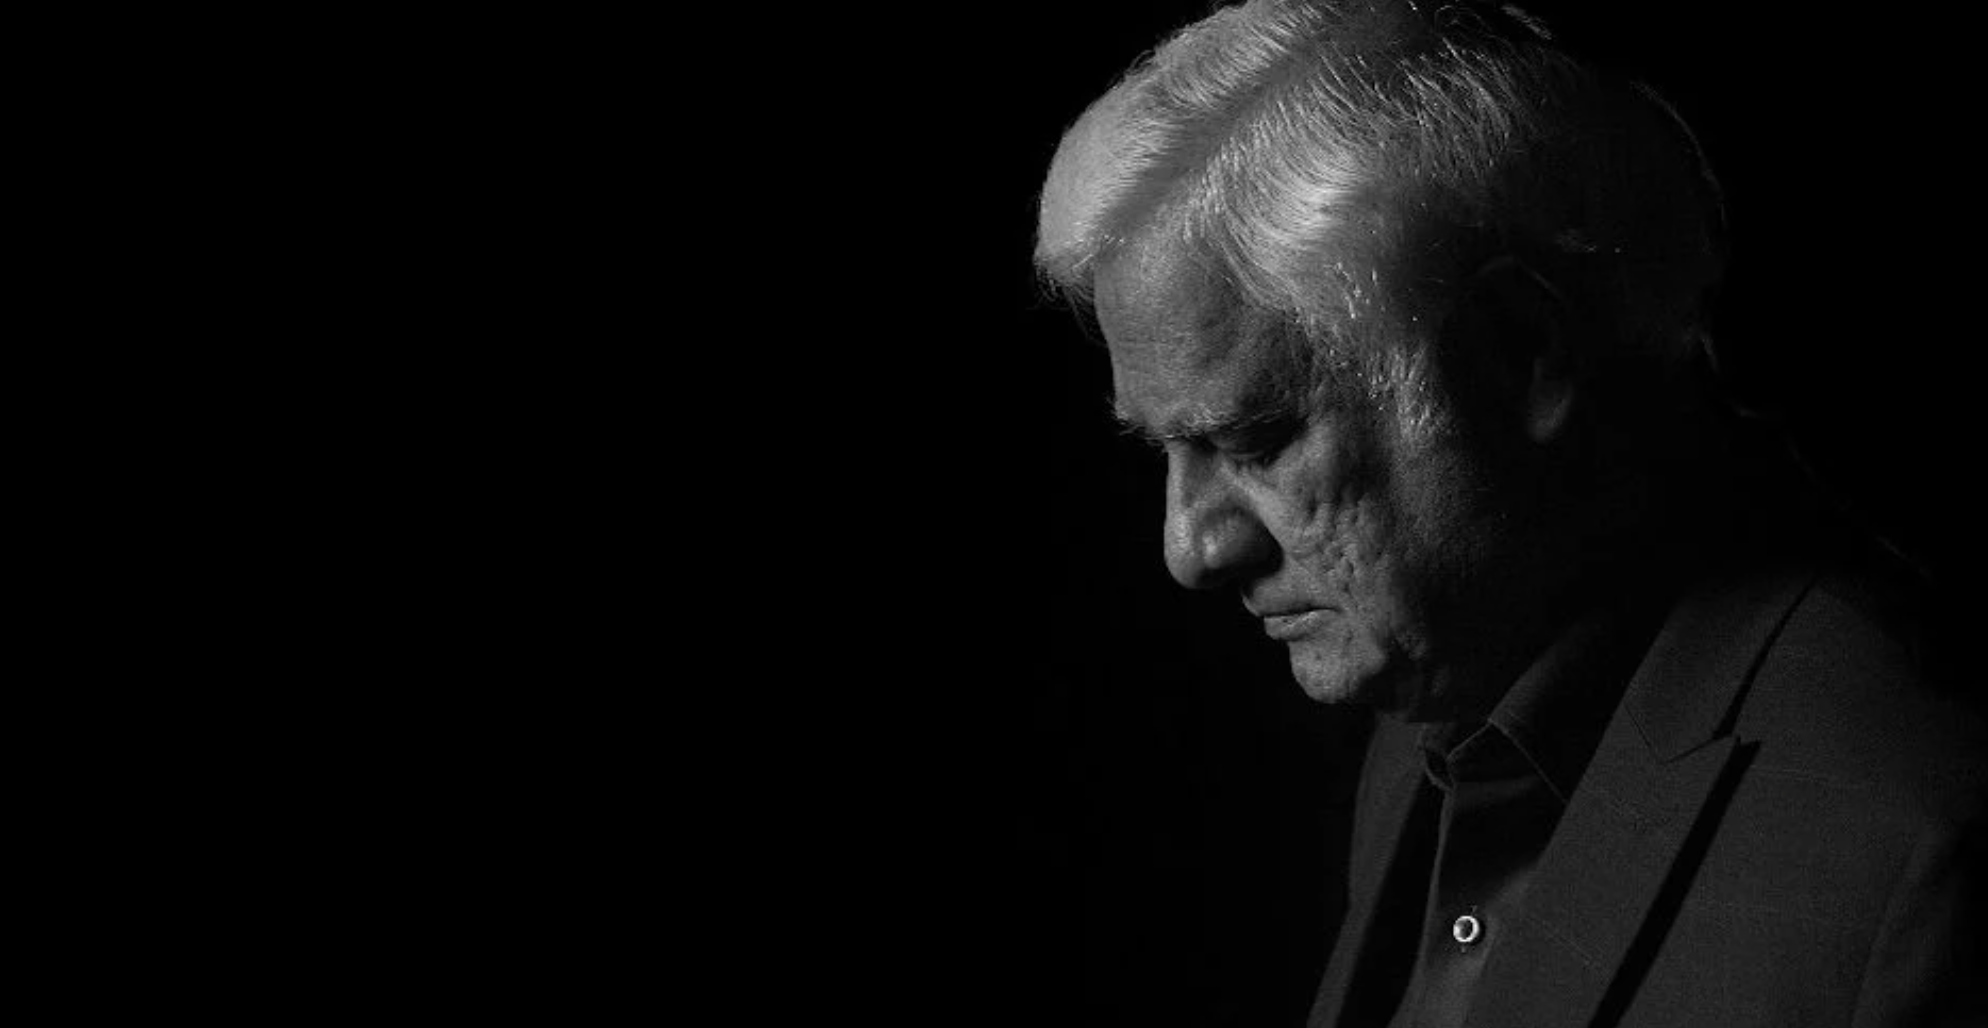 Post Ravi Zacharias: 3 Things the Church Must Change Now